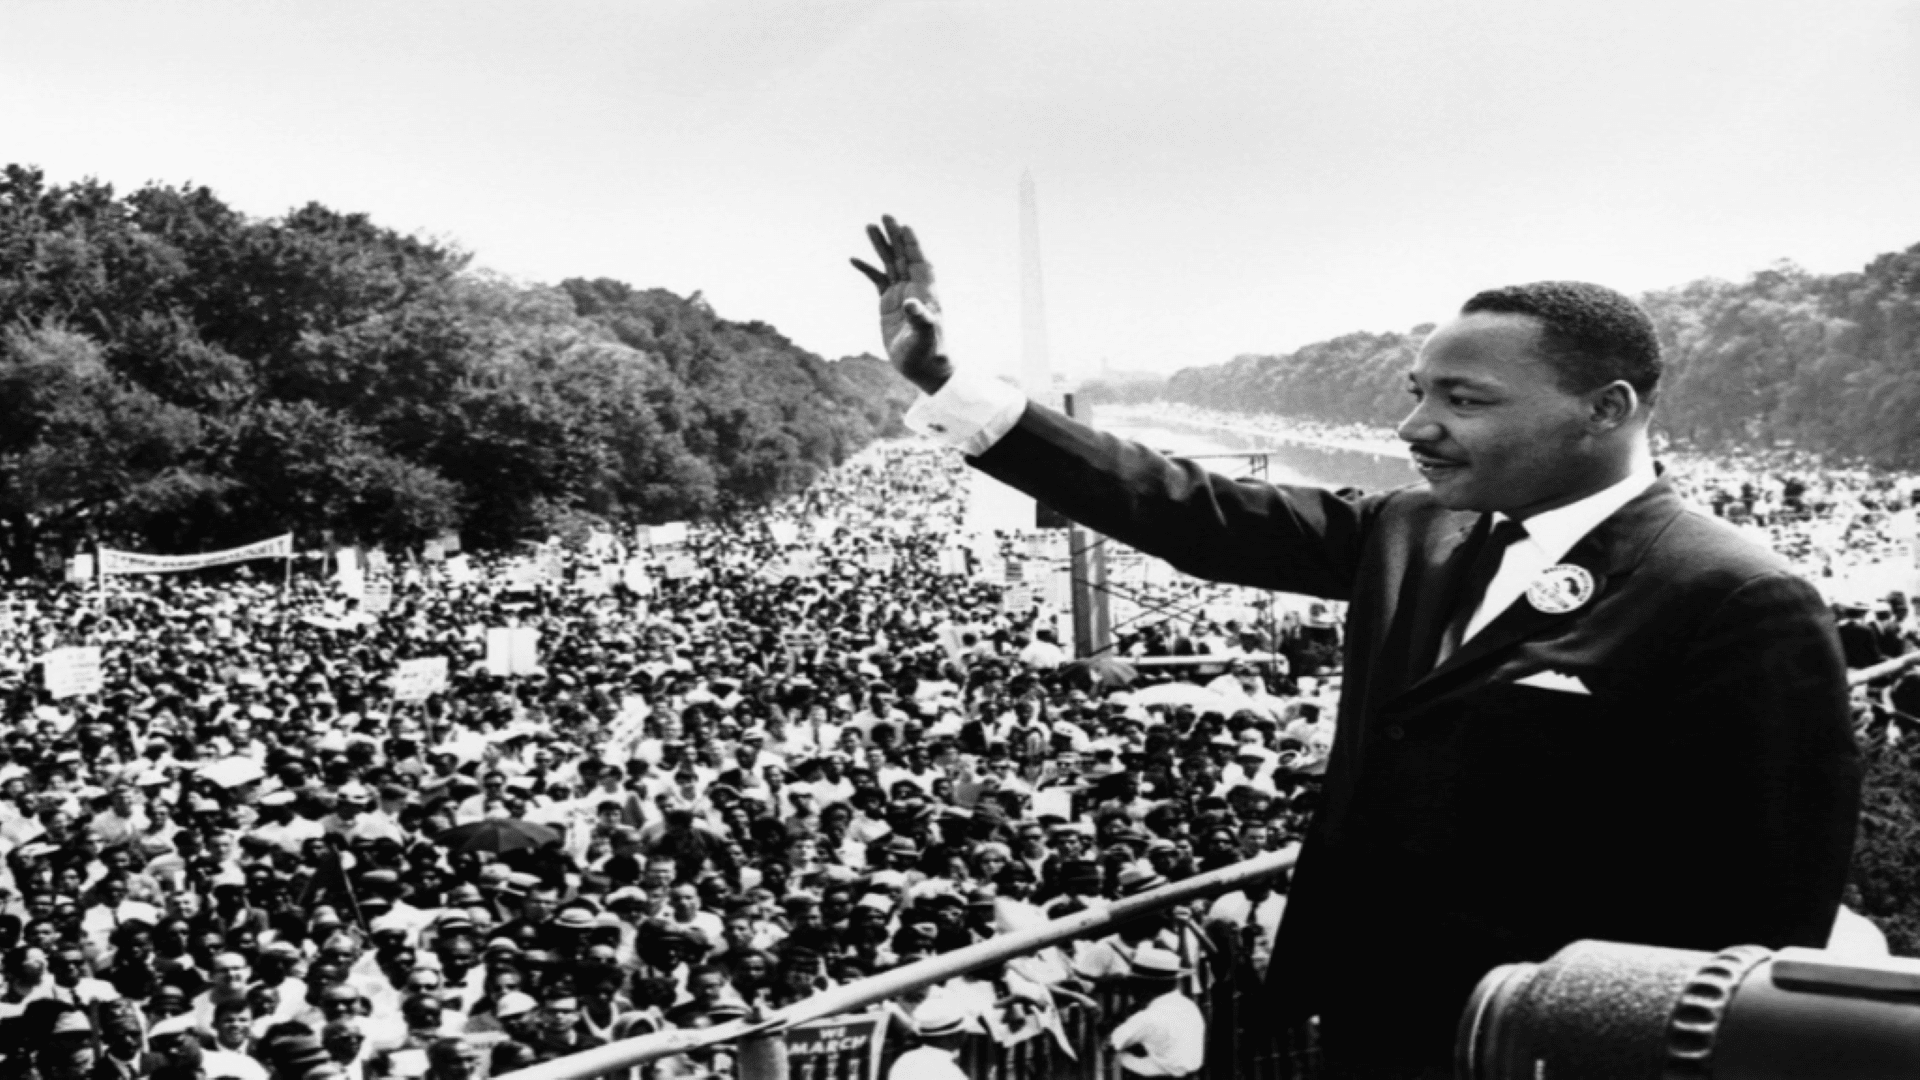 Martin Luther King Jr S “i Have A Dream” Speech Called For The Liberty Of All Americans